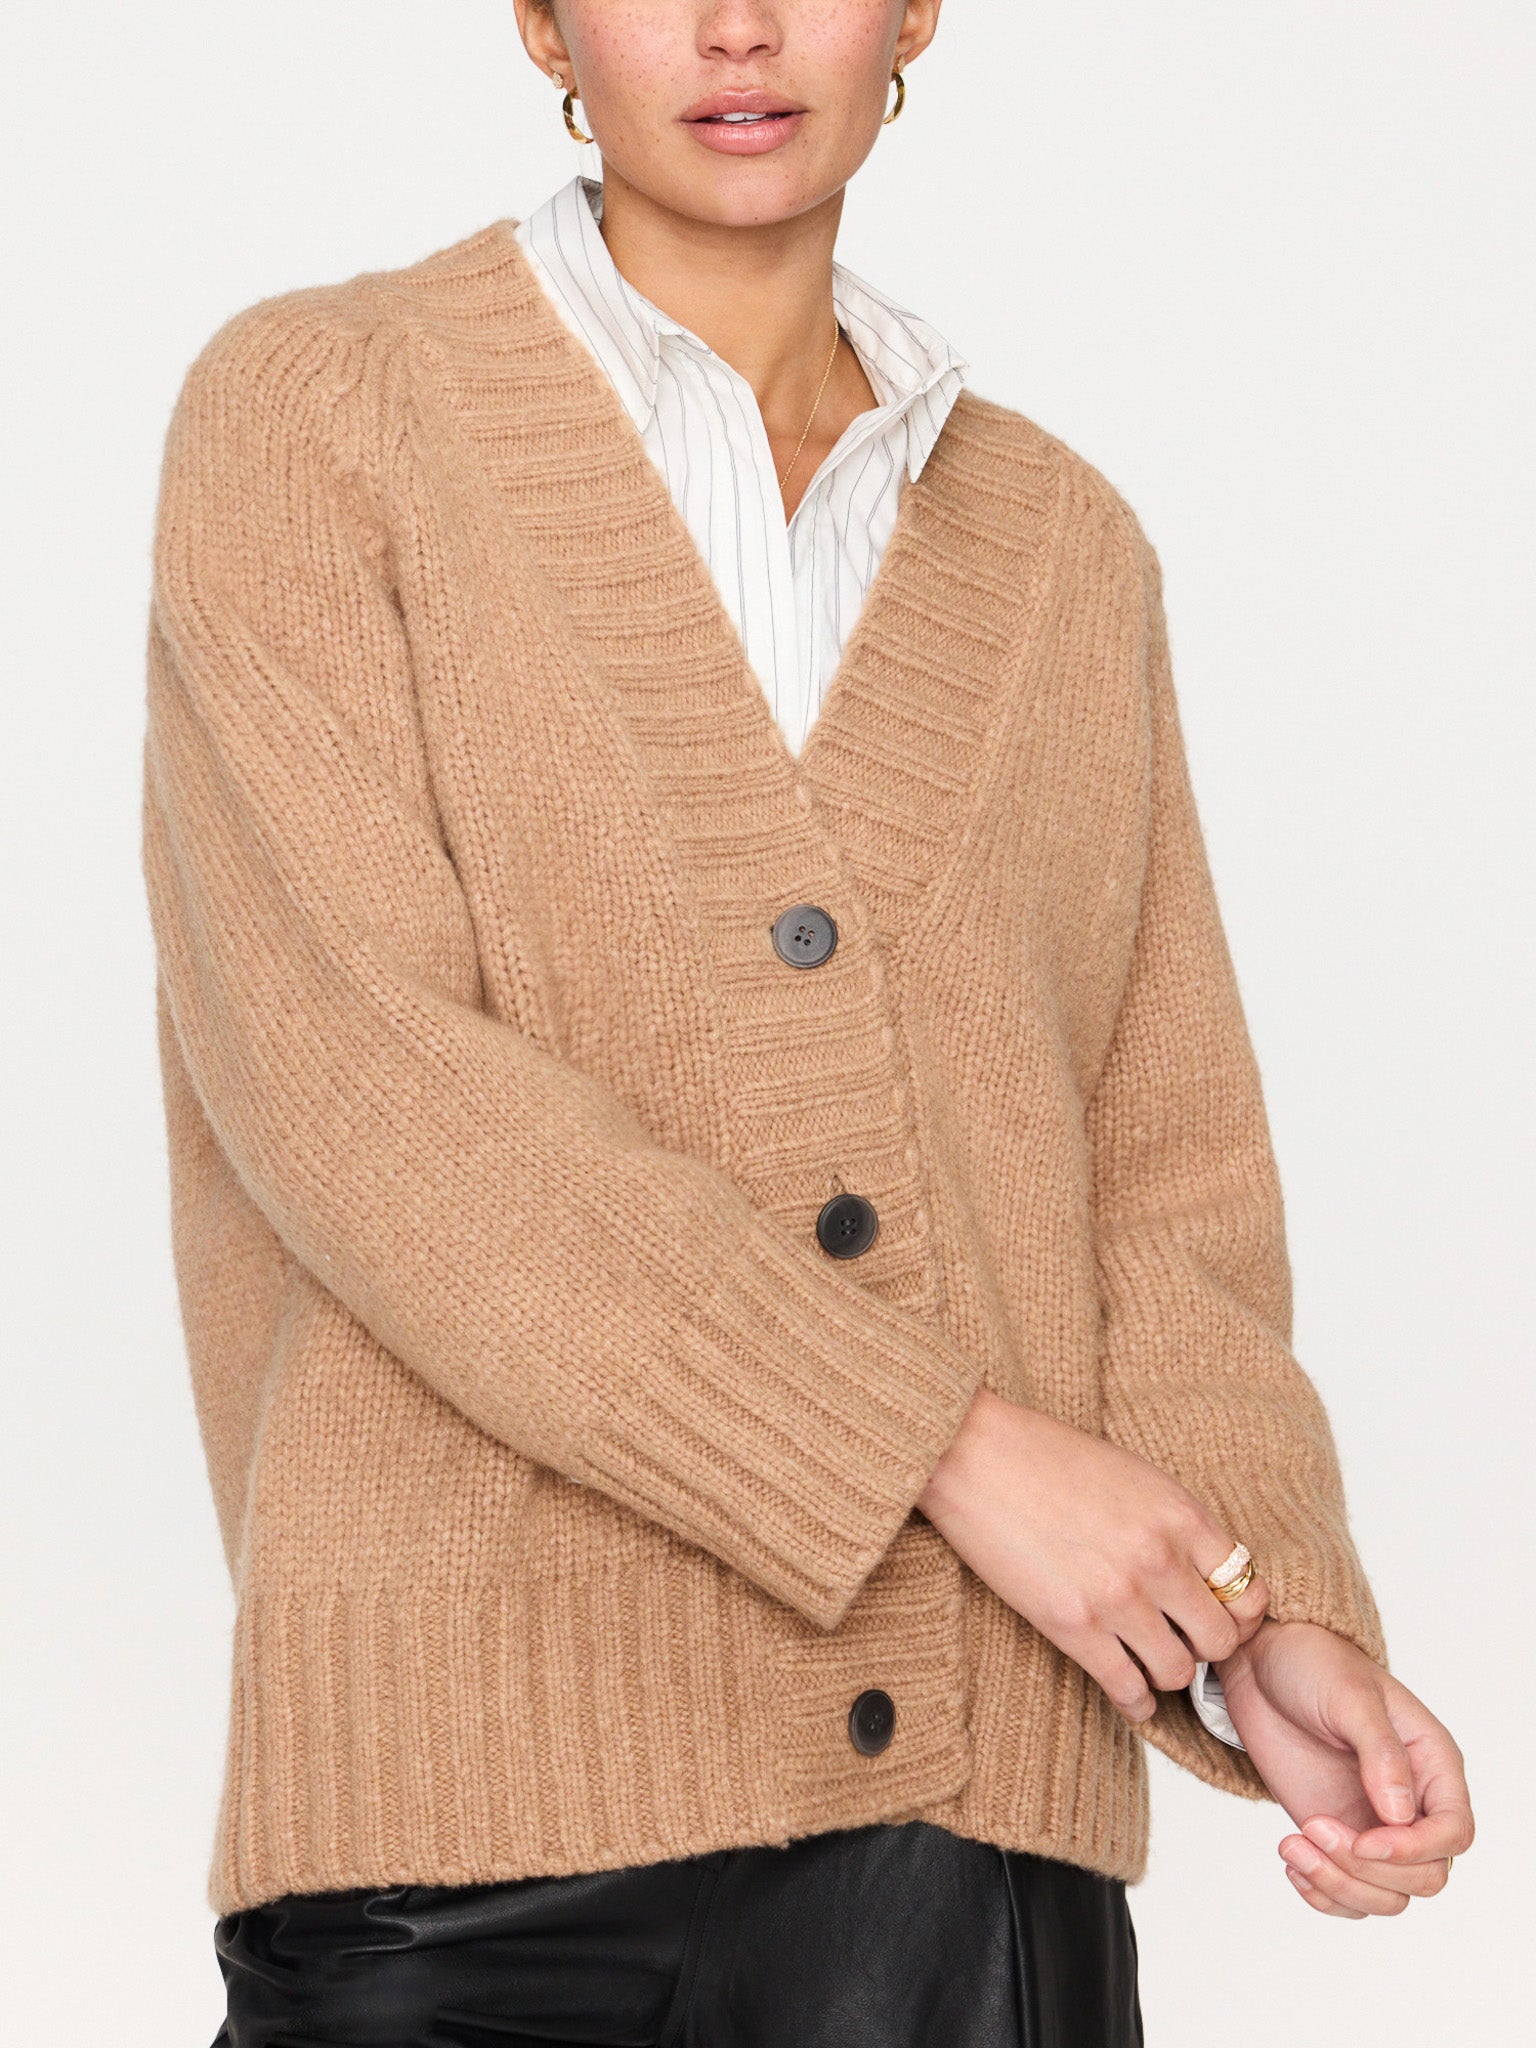 Cassian tan cardigan sweater front view 